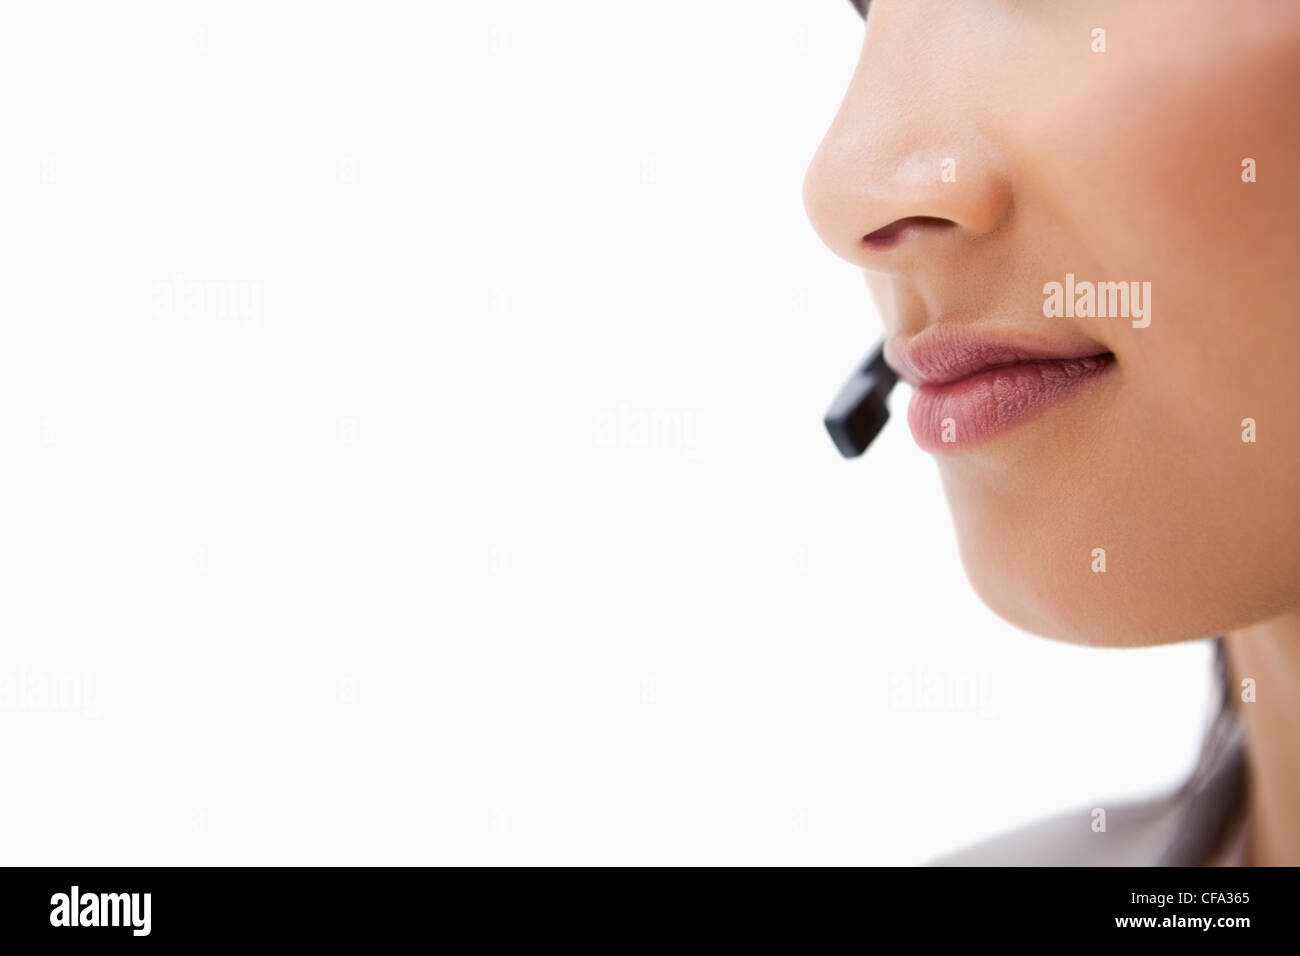 Mouth of female call center agent Stock Photo